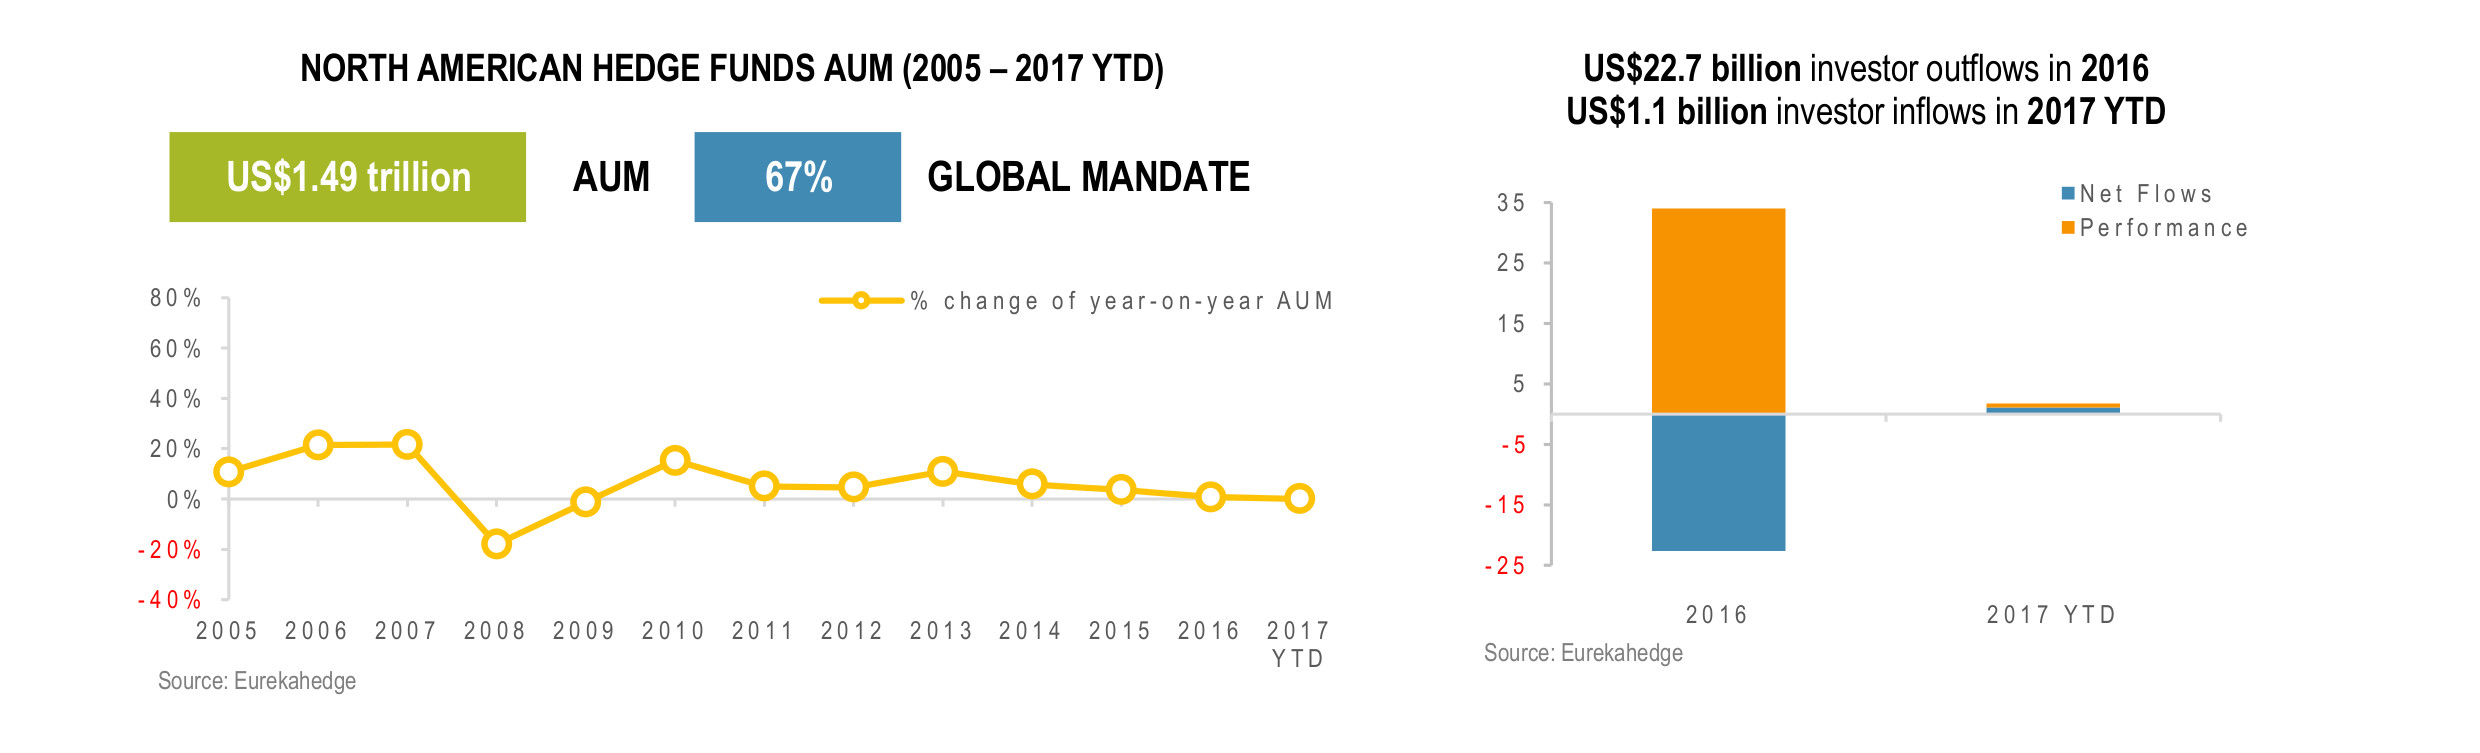 North American Hedge Fund Infographic March 2017 - AUM and Gloabl Mandate